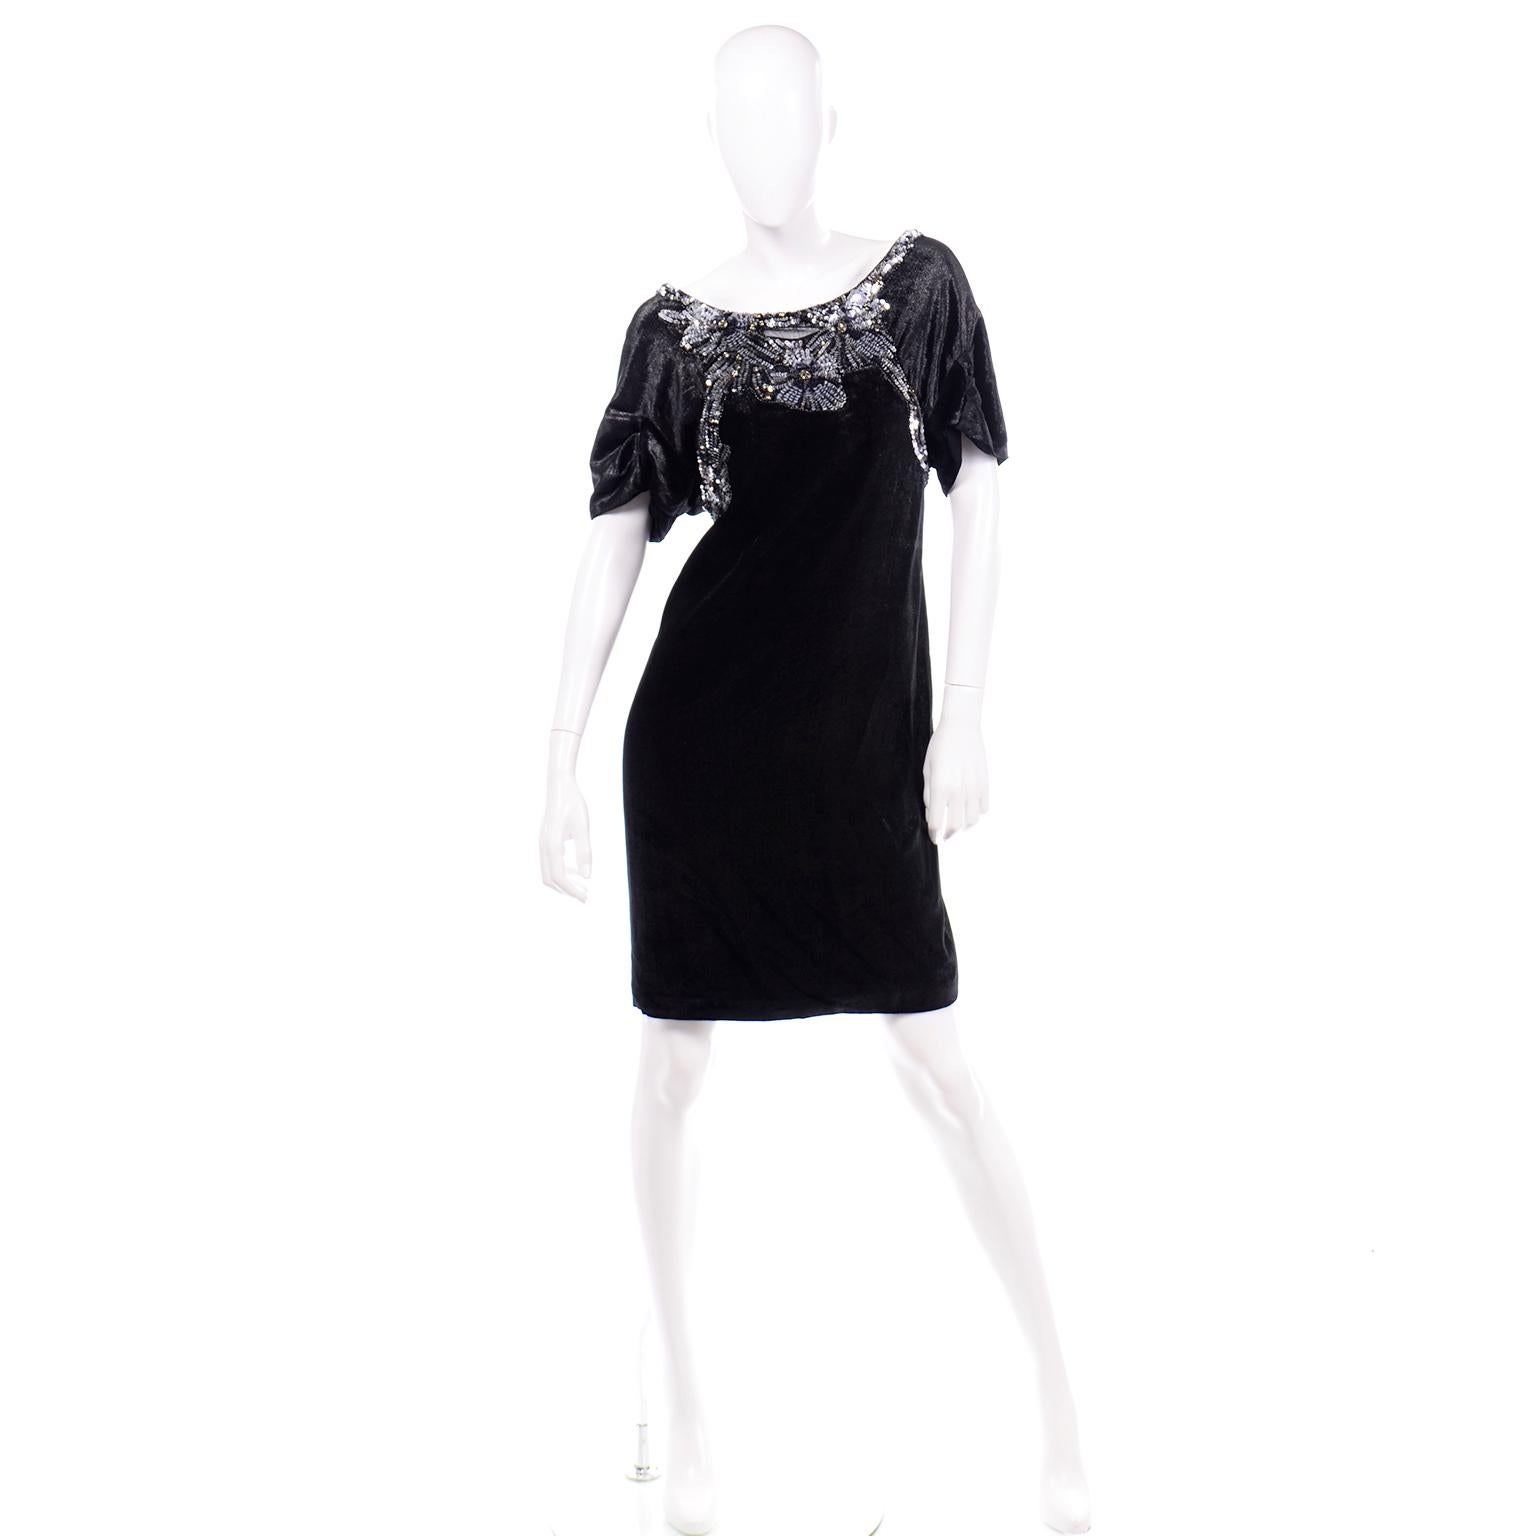 This lovely Alberta Ferretti black sparkle velvet dress has a beautiful blue tone silver sequin and black bead detail throughout the bust and back. The silver and blue tone sequins are all arranged to create flower-like figures with a center gem.